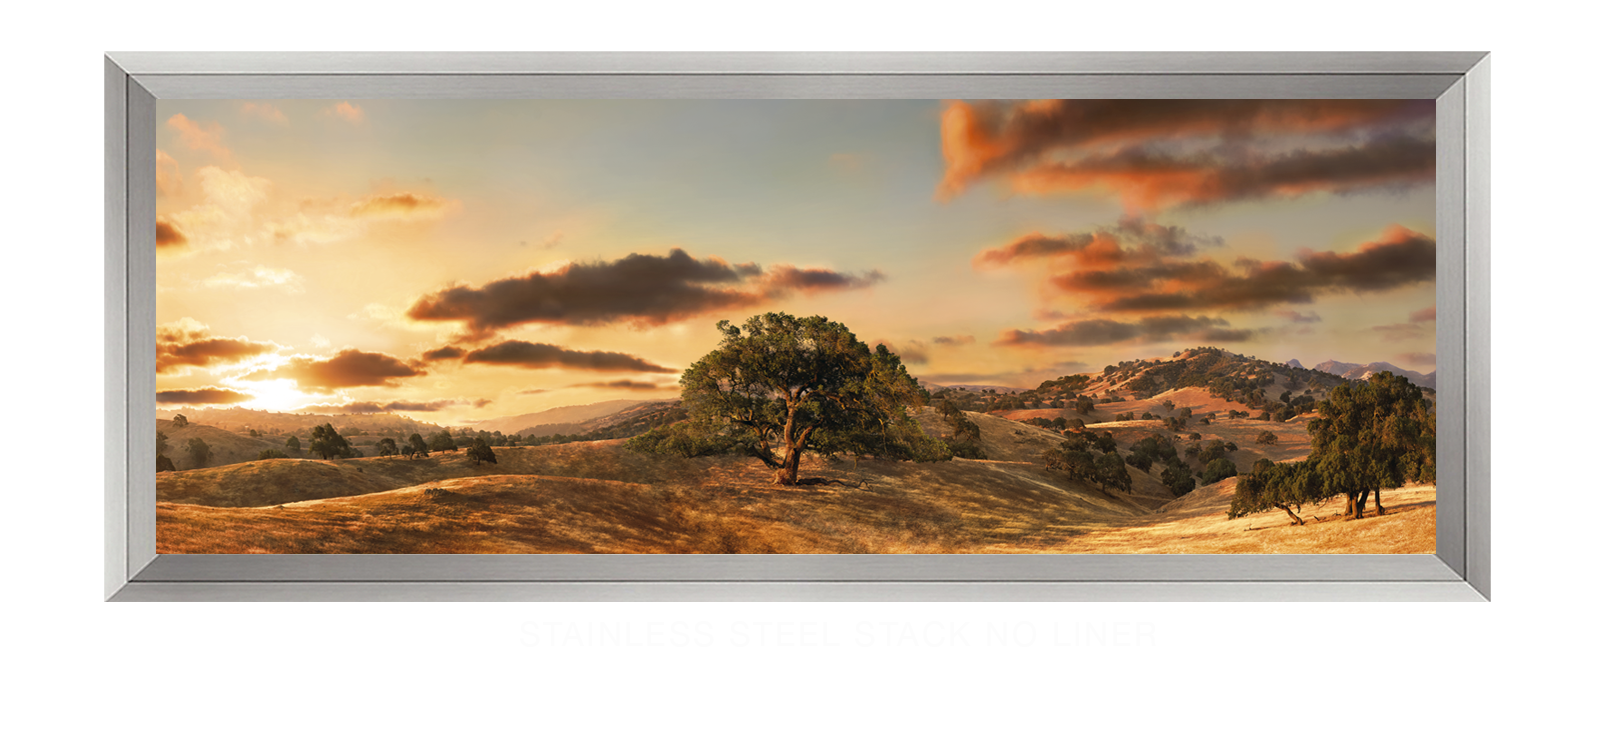 7OAKS Stainless Steel Stack No Liner T